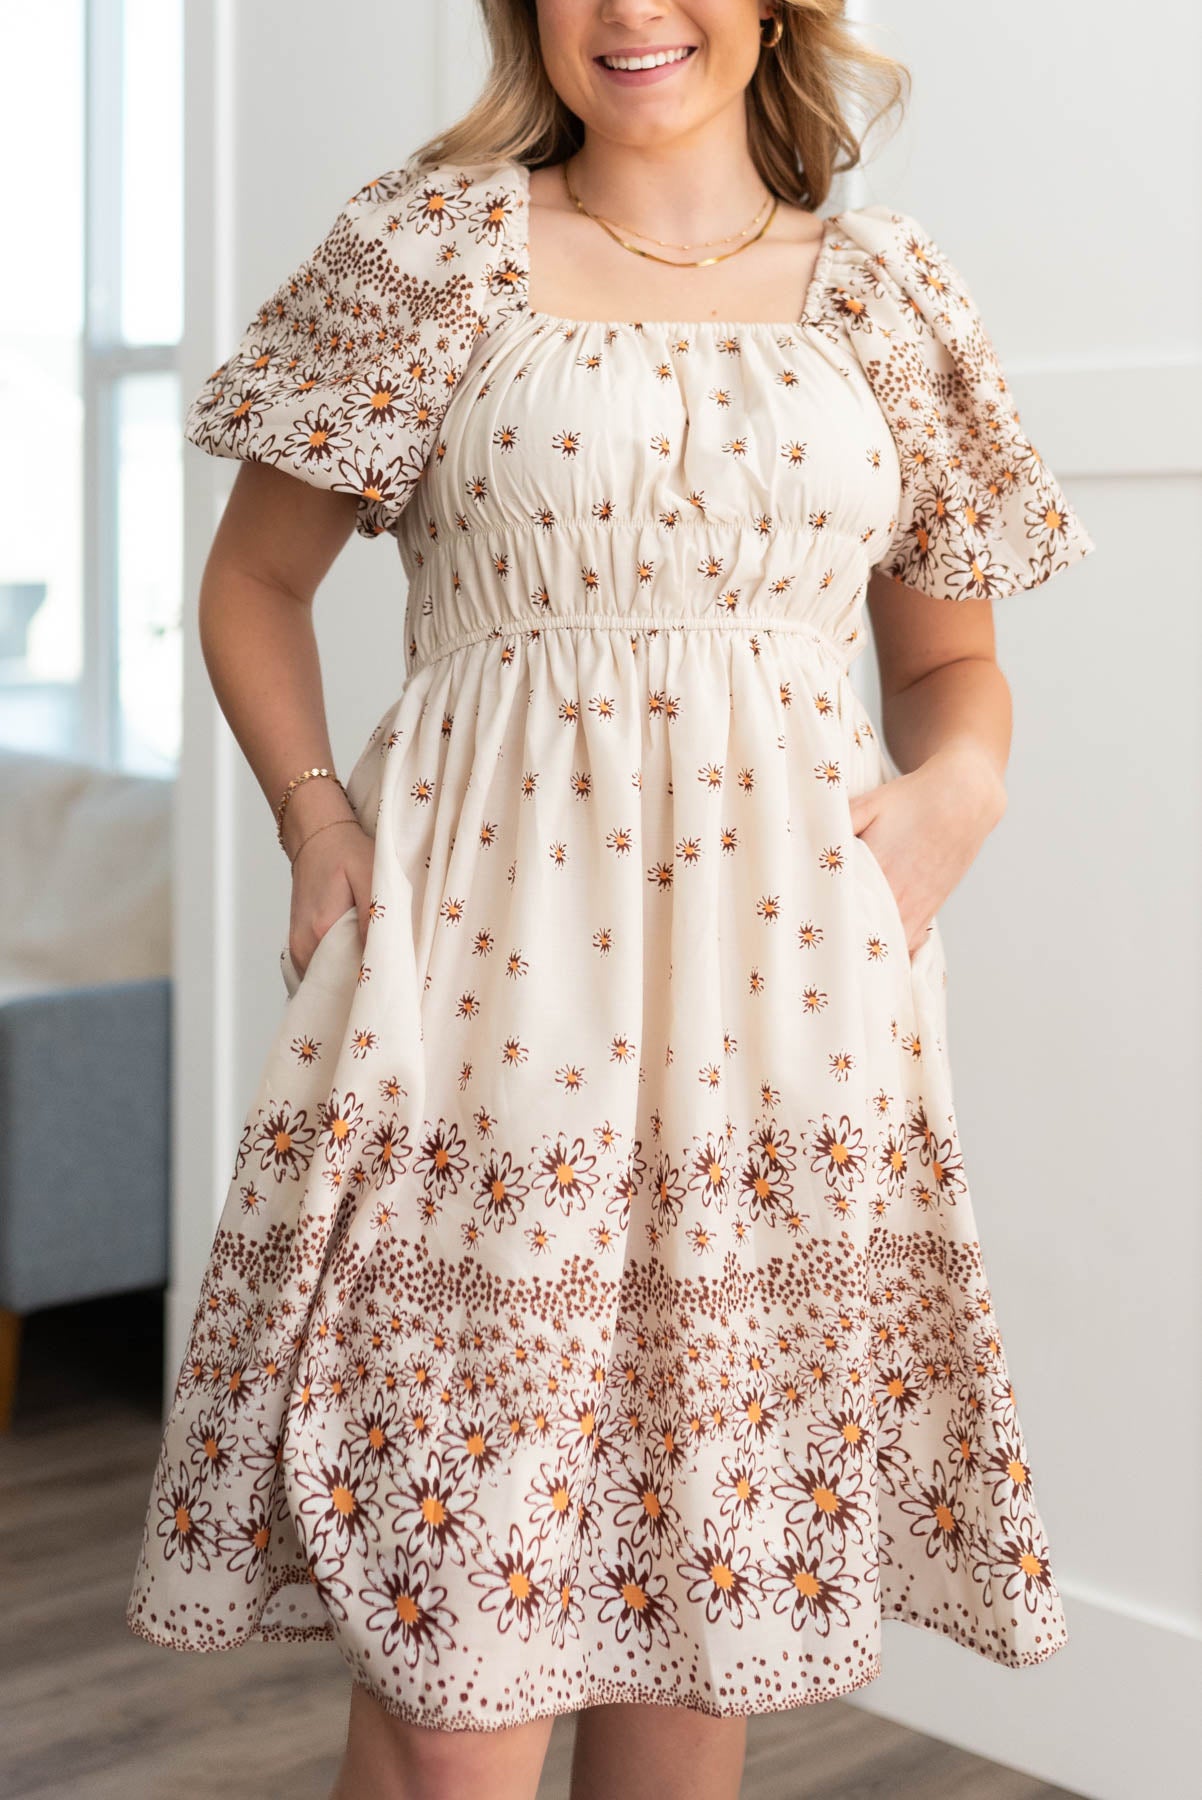 Short sleeve beige daisy dress with smocking on the bodice and pockets